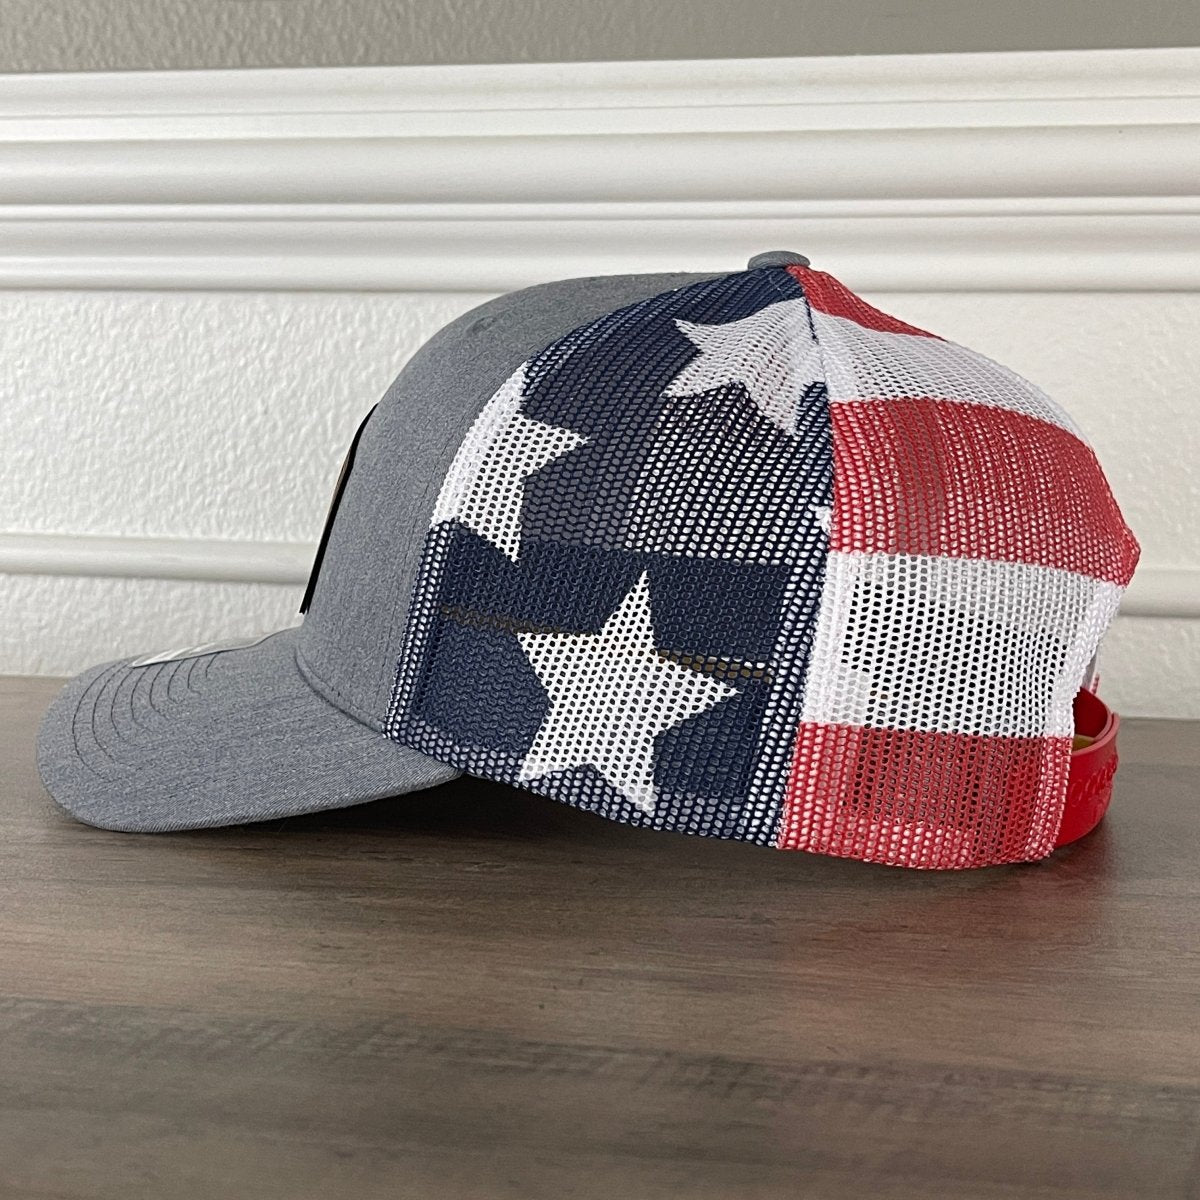 Overworked And Underlaid Funny Leather Patch Hat Stars & Stripes Patch Hat - VividEditions